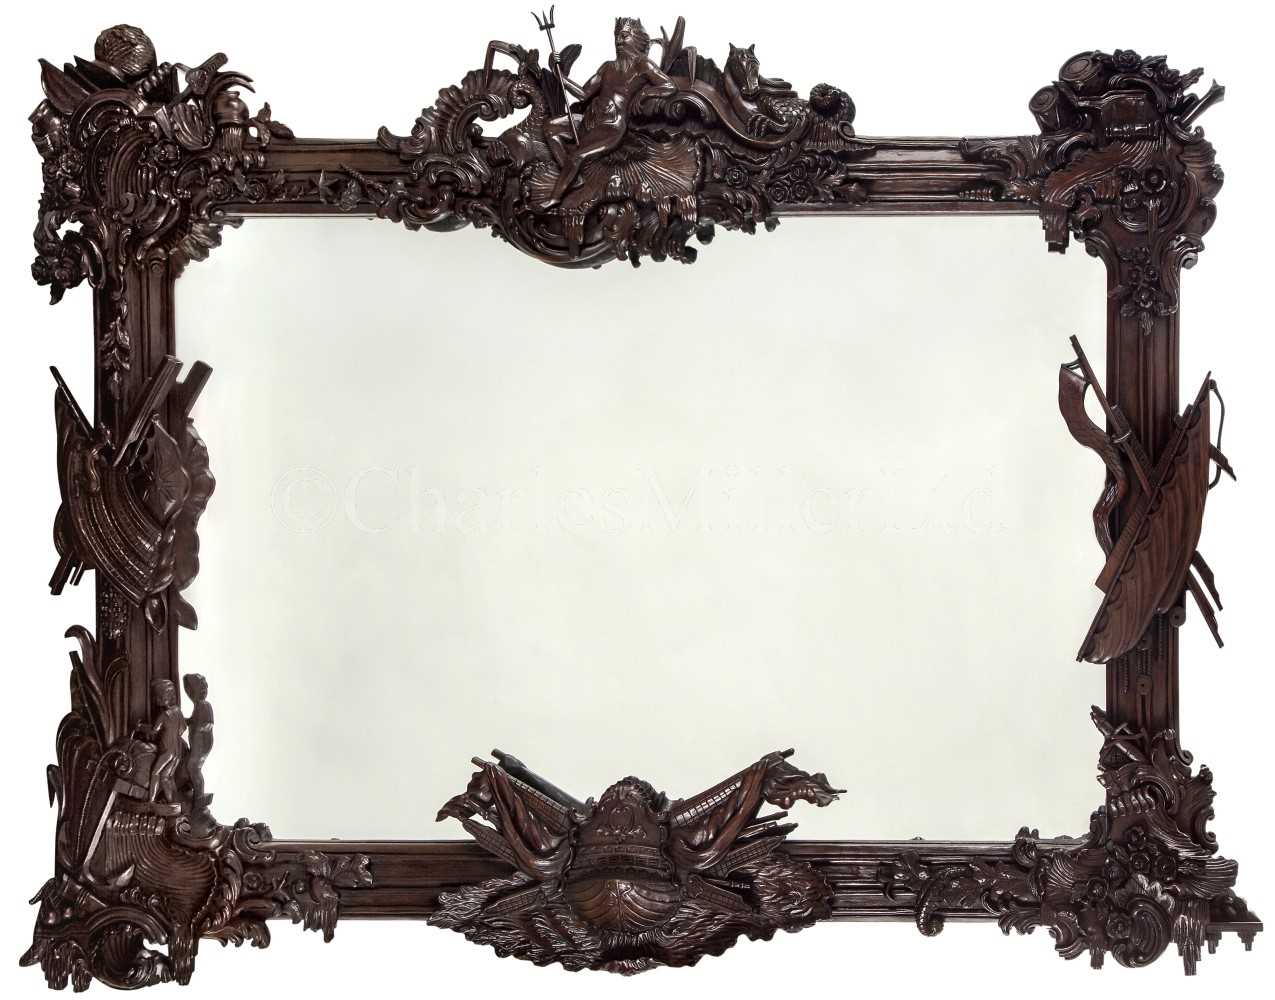 Lot 25 - AN IMPRESSIVE MARINE-THEMED OVERMANTLE MIRROR, POSSIBLY FROM A CLUB, CIRCA 1900